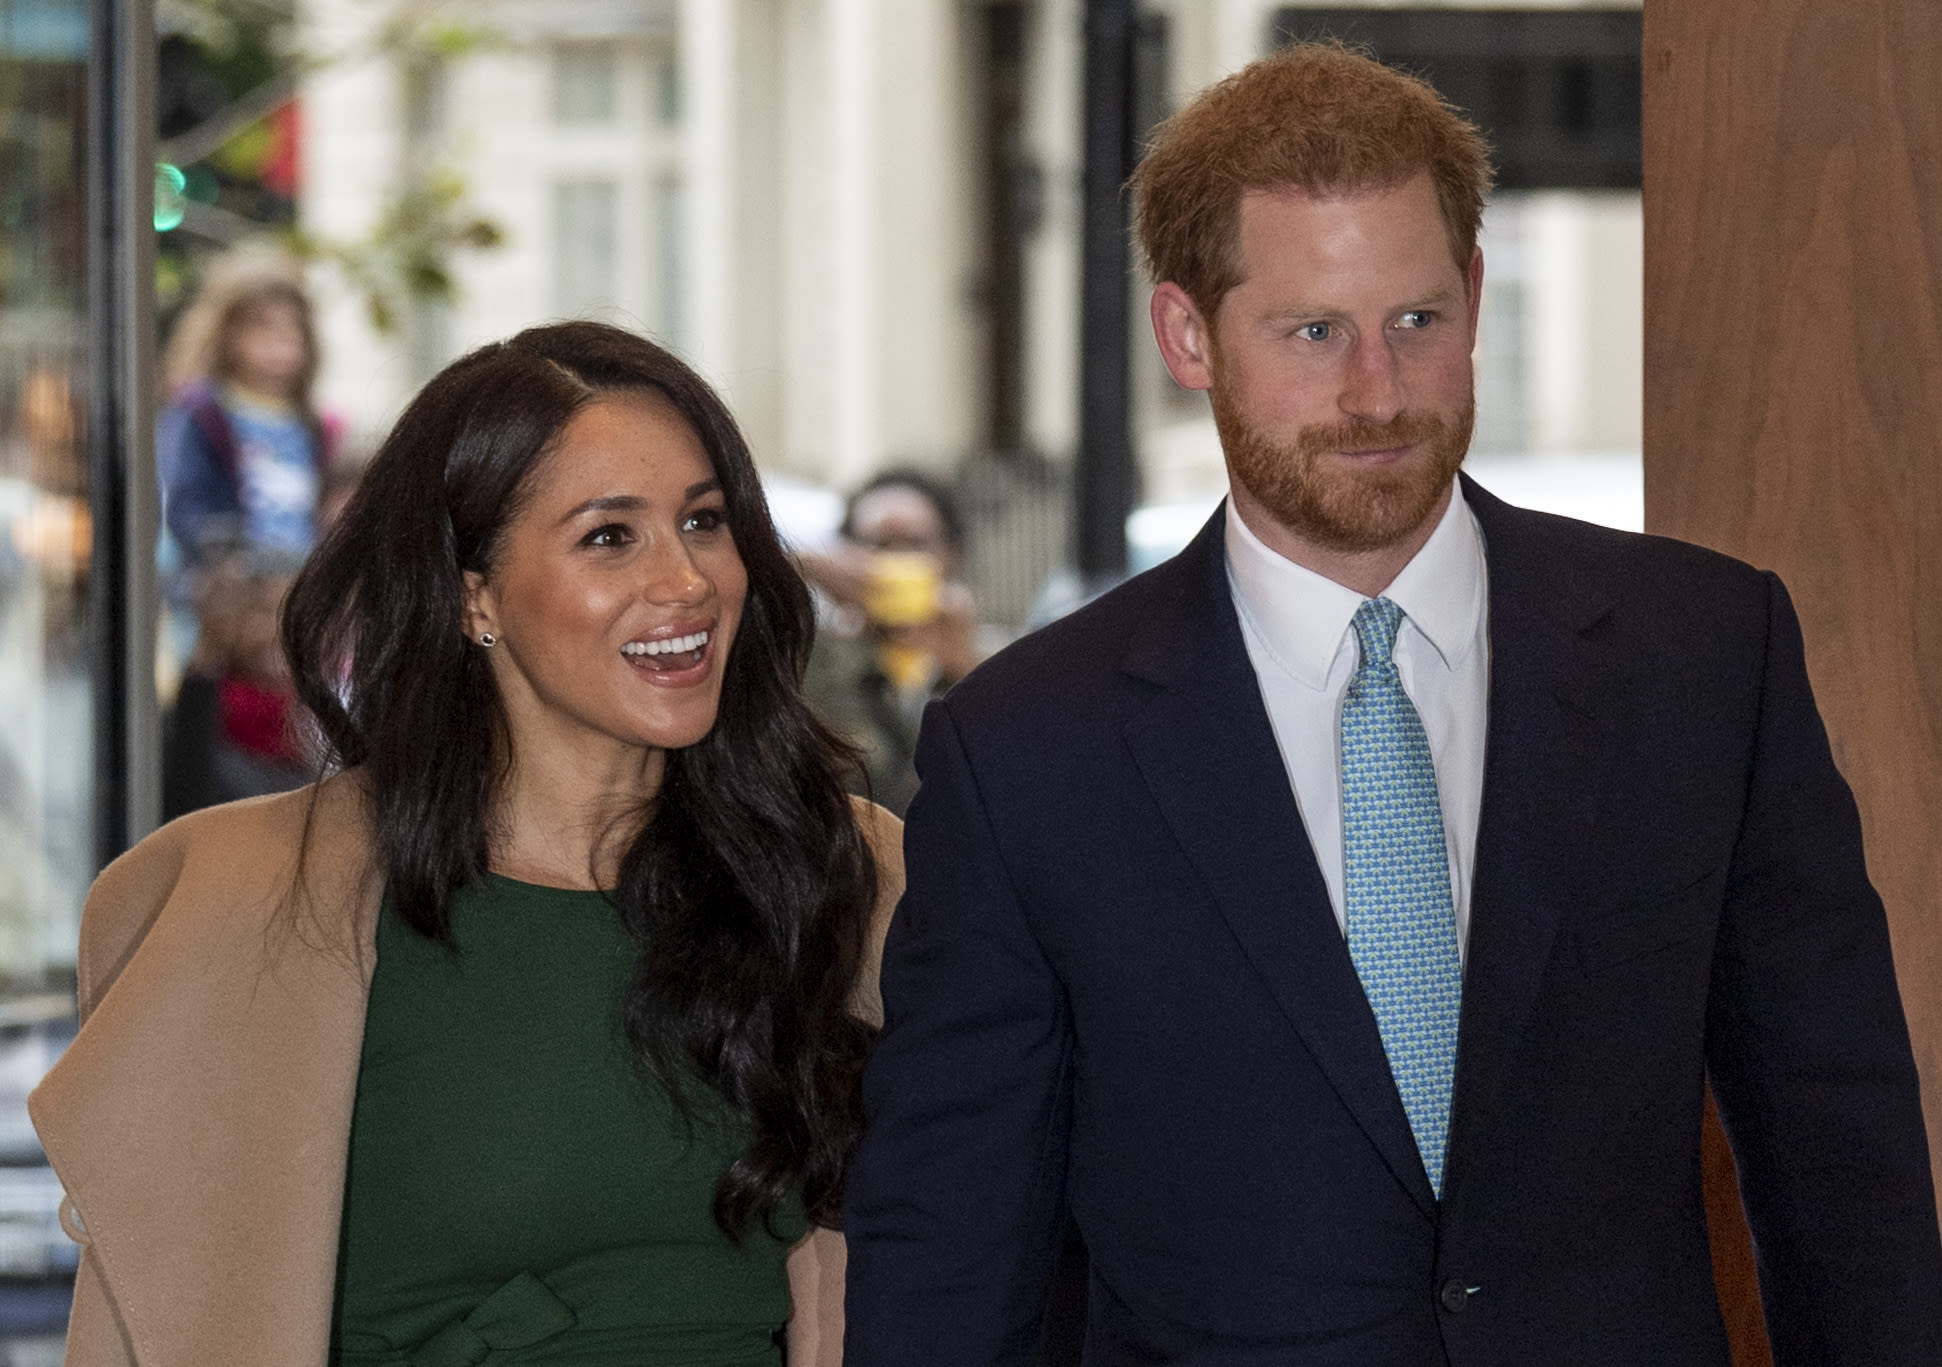 Meghan Markle rewears her engagement dress to attend Wellchild Awards ceremony